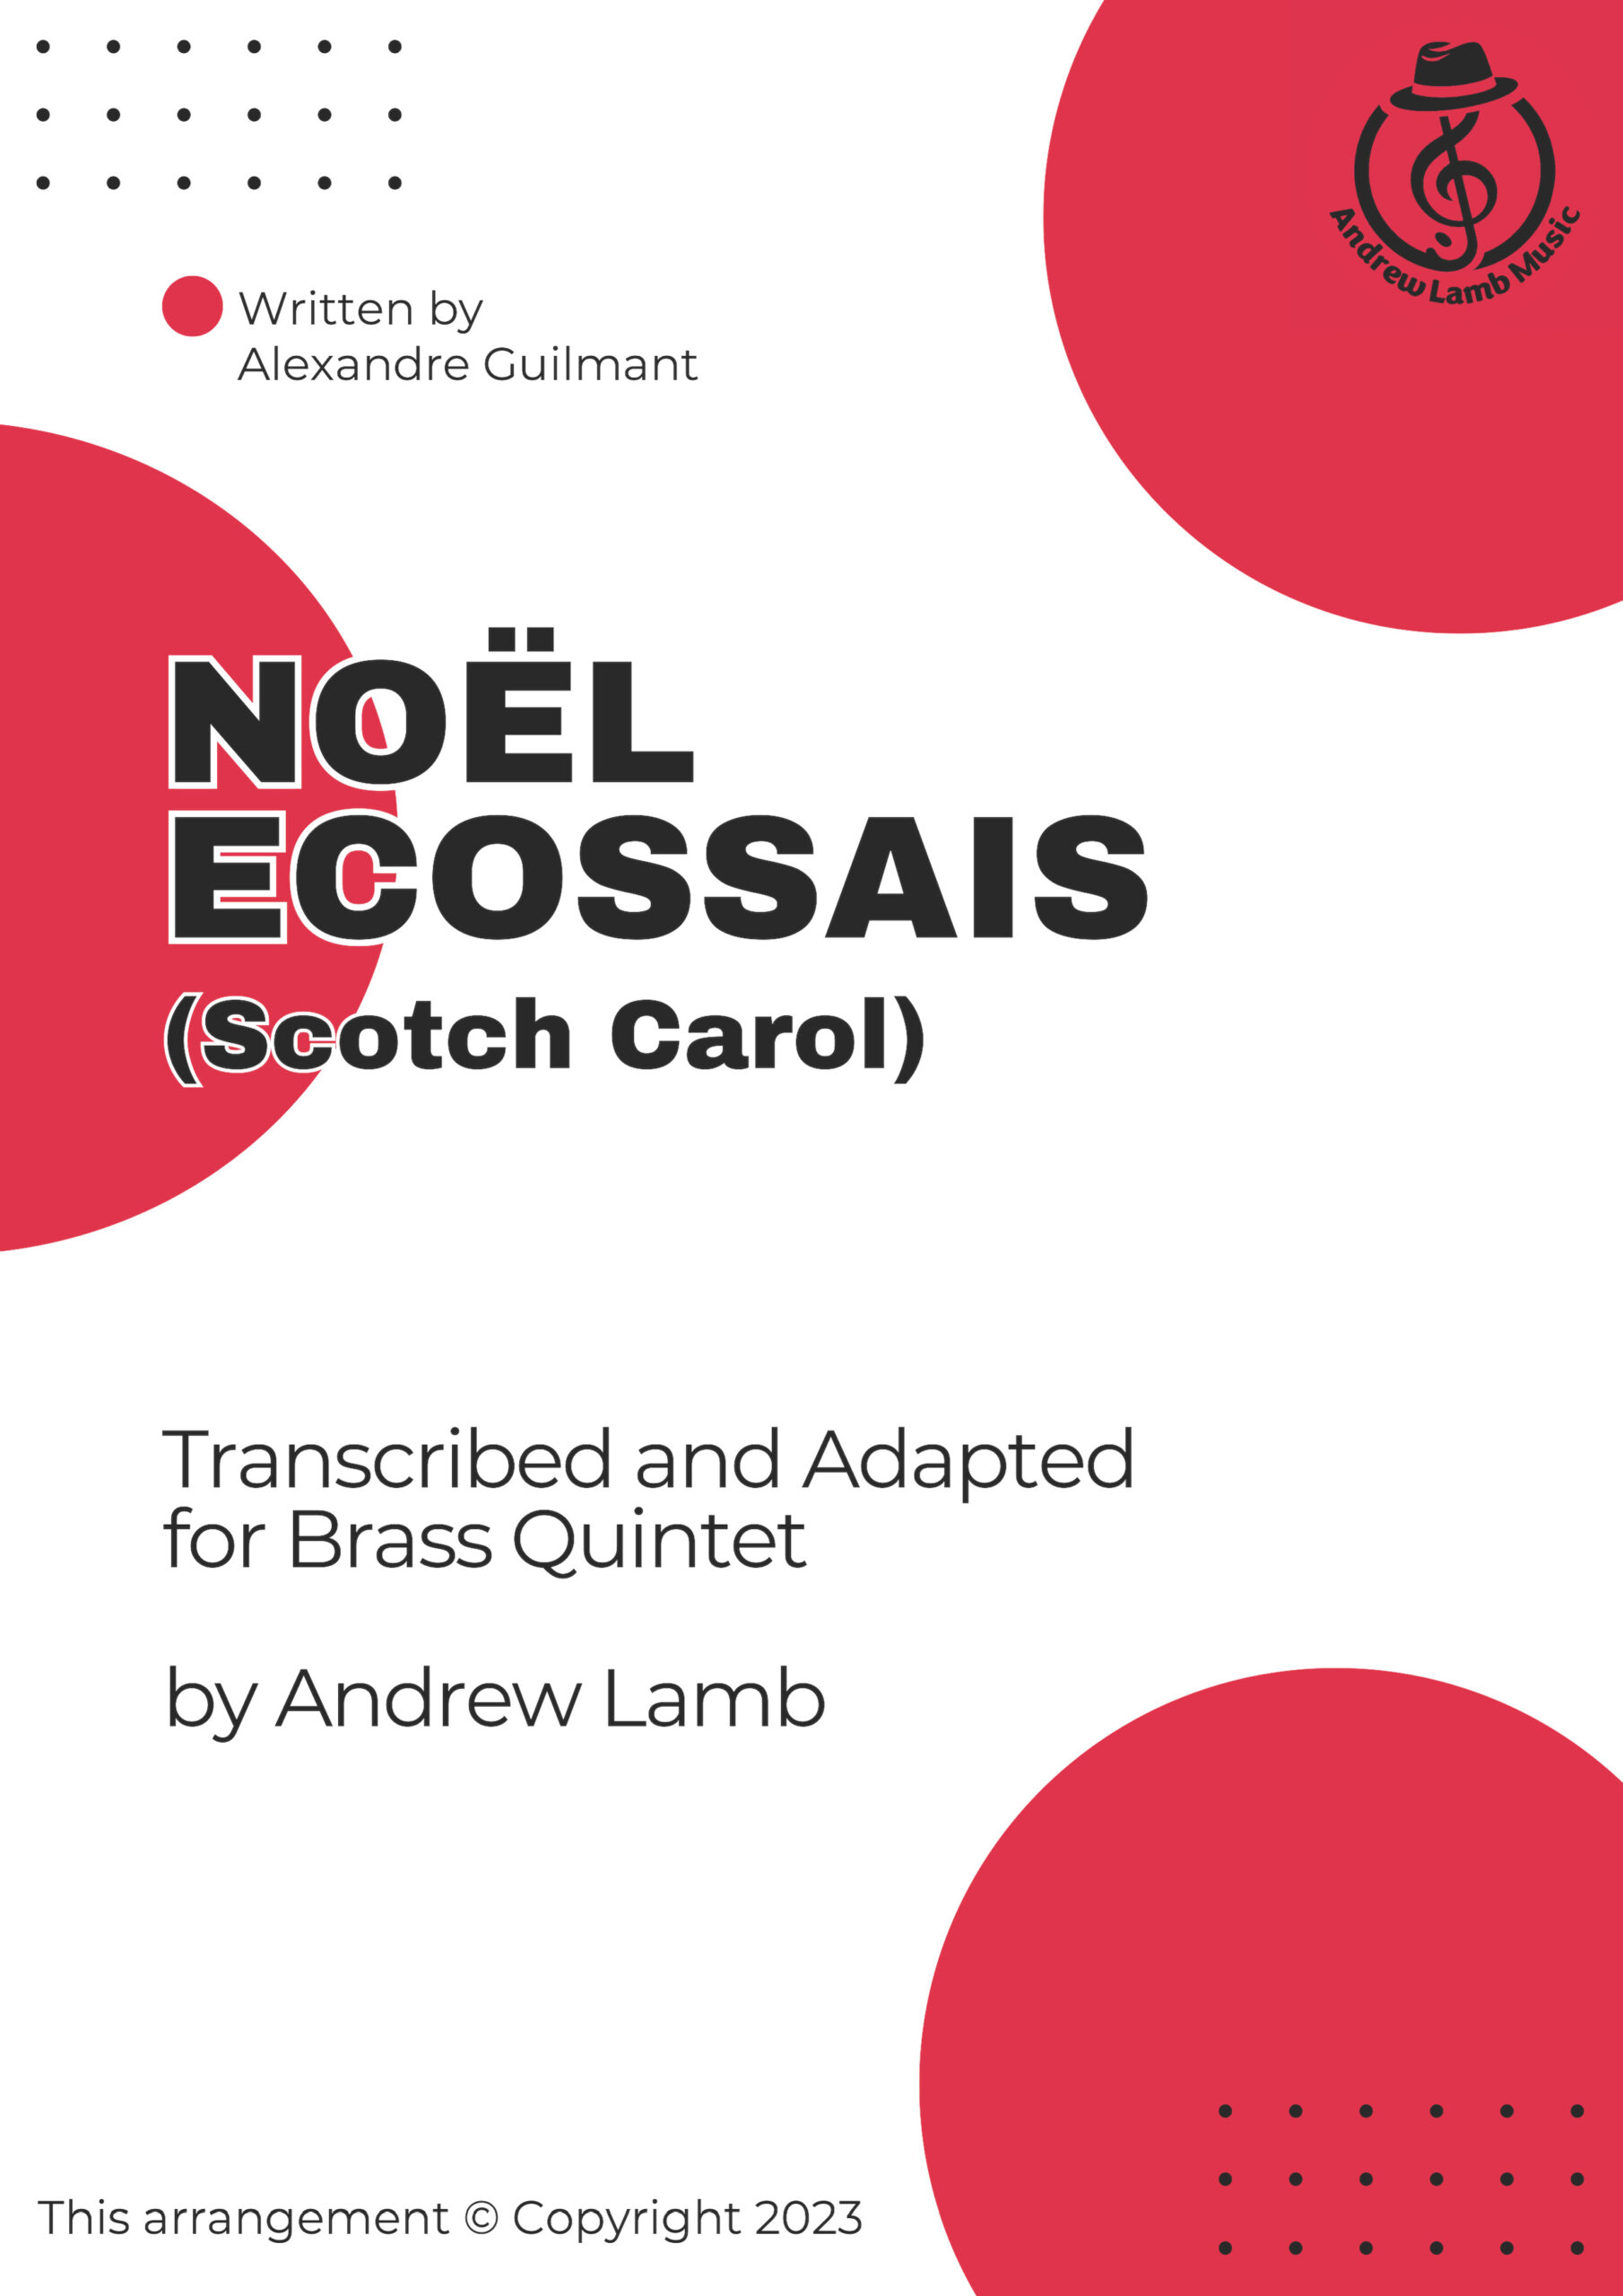 Brass Quintet Cover Page 1 scaled